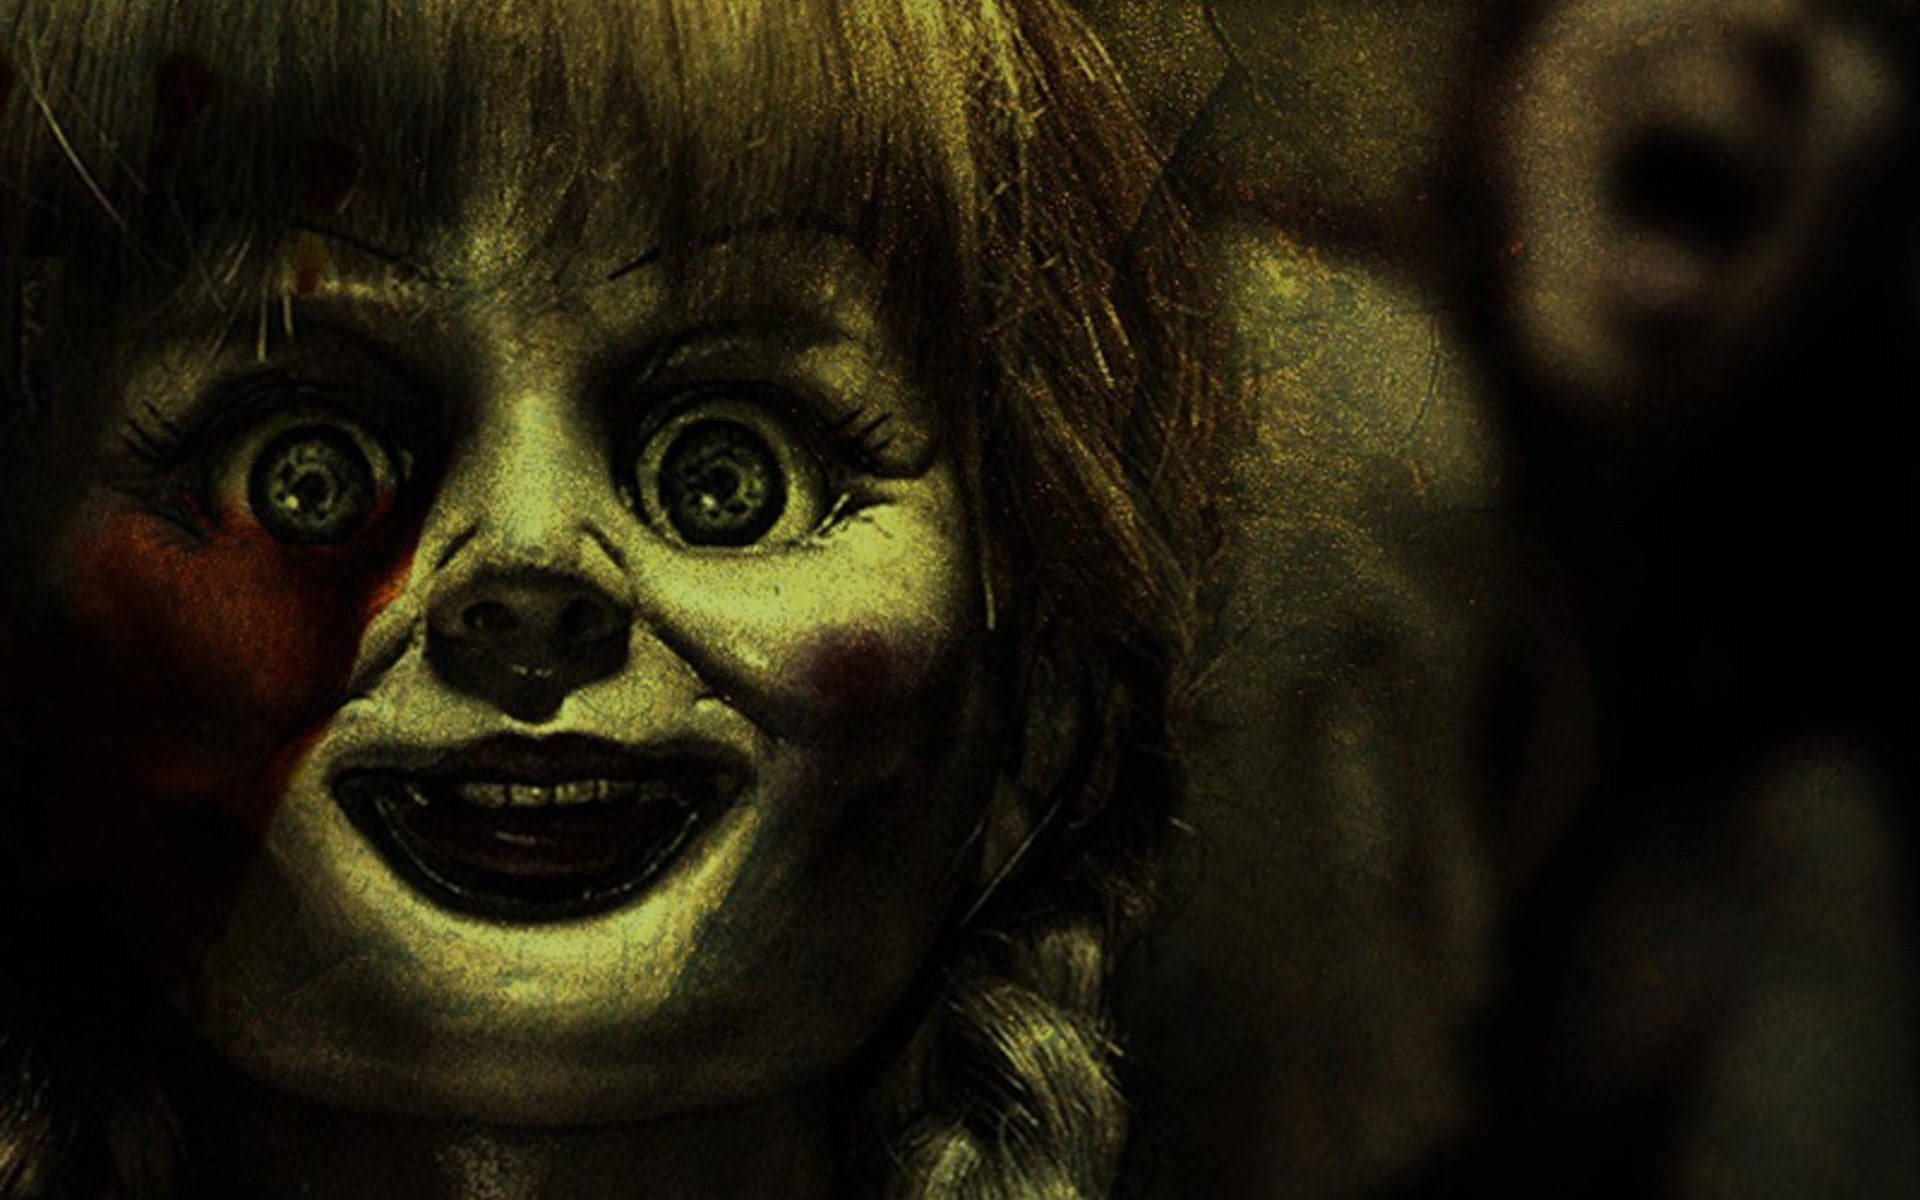 Closed-up Annabelle Doll Wallpaper